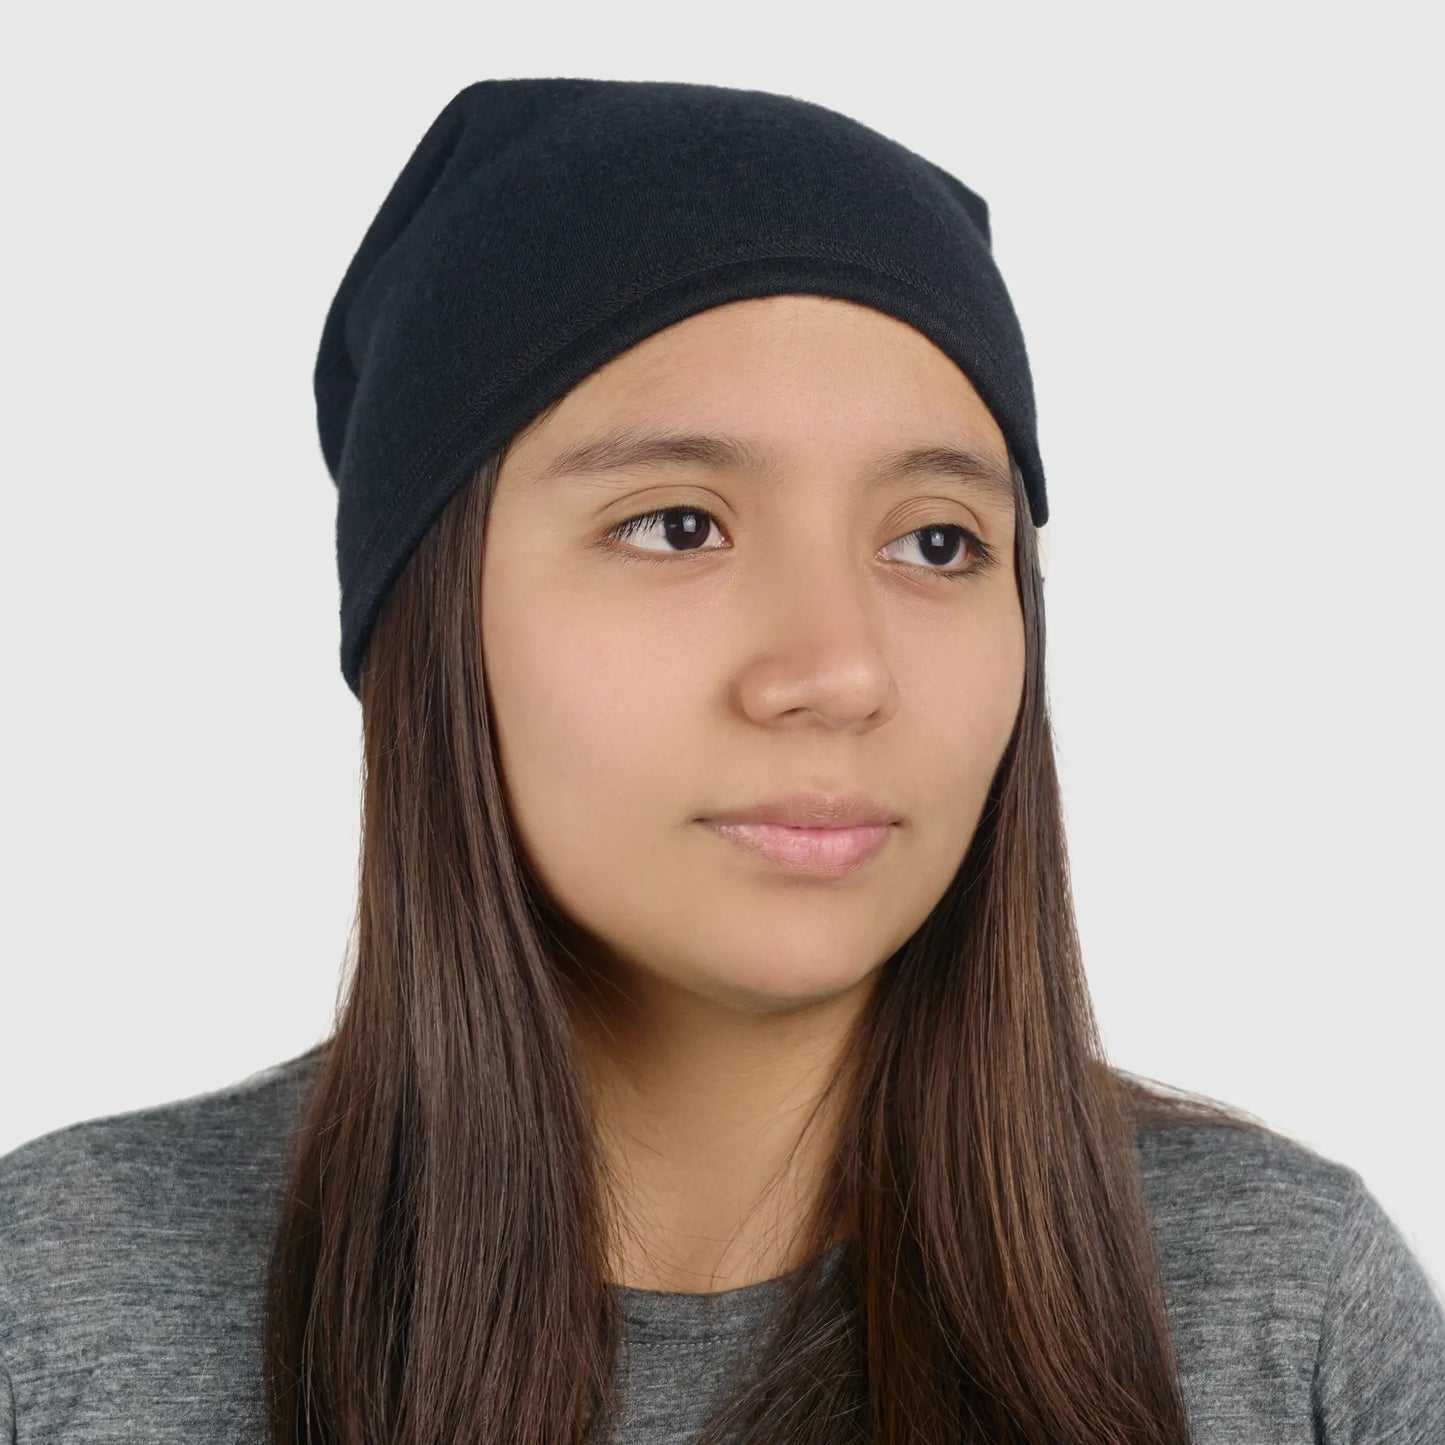 unisex all activities folded beanie hat lightweight color black